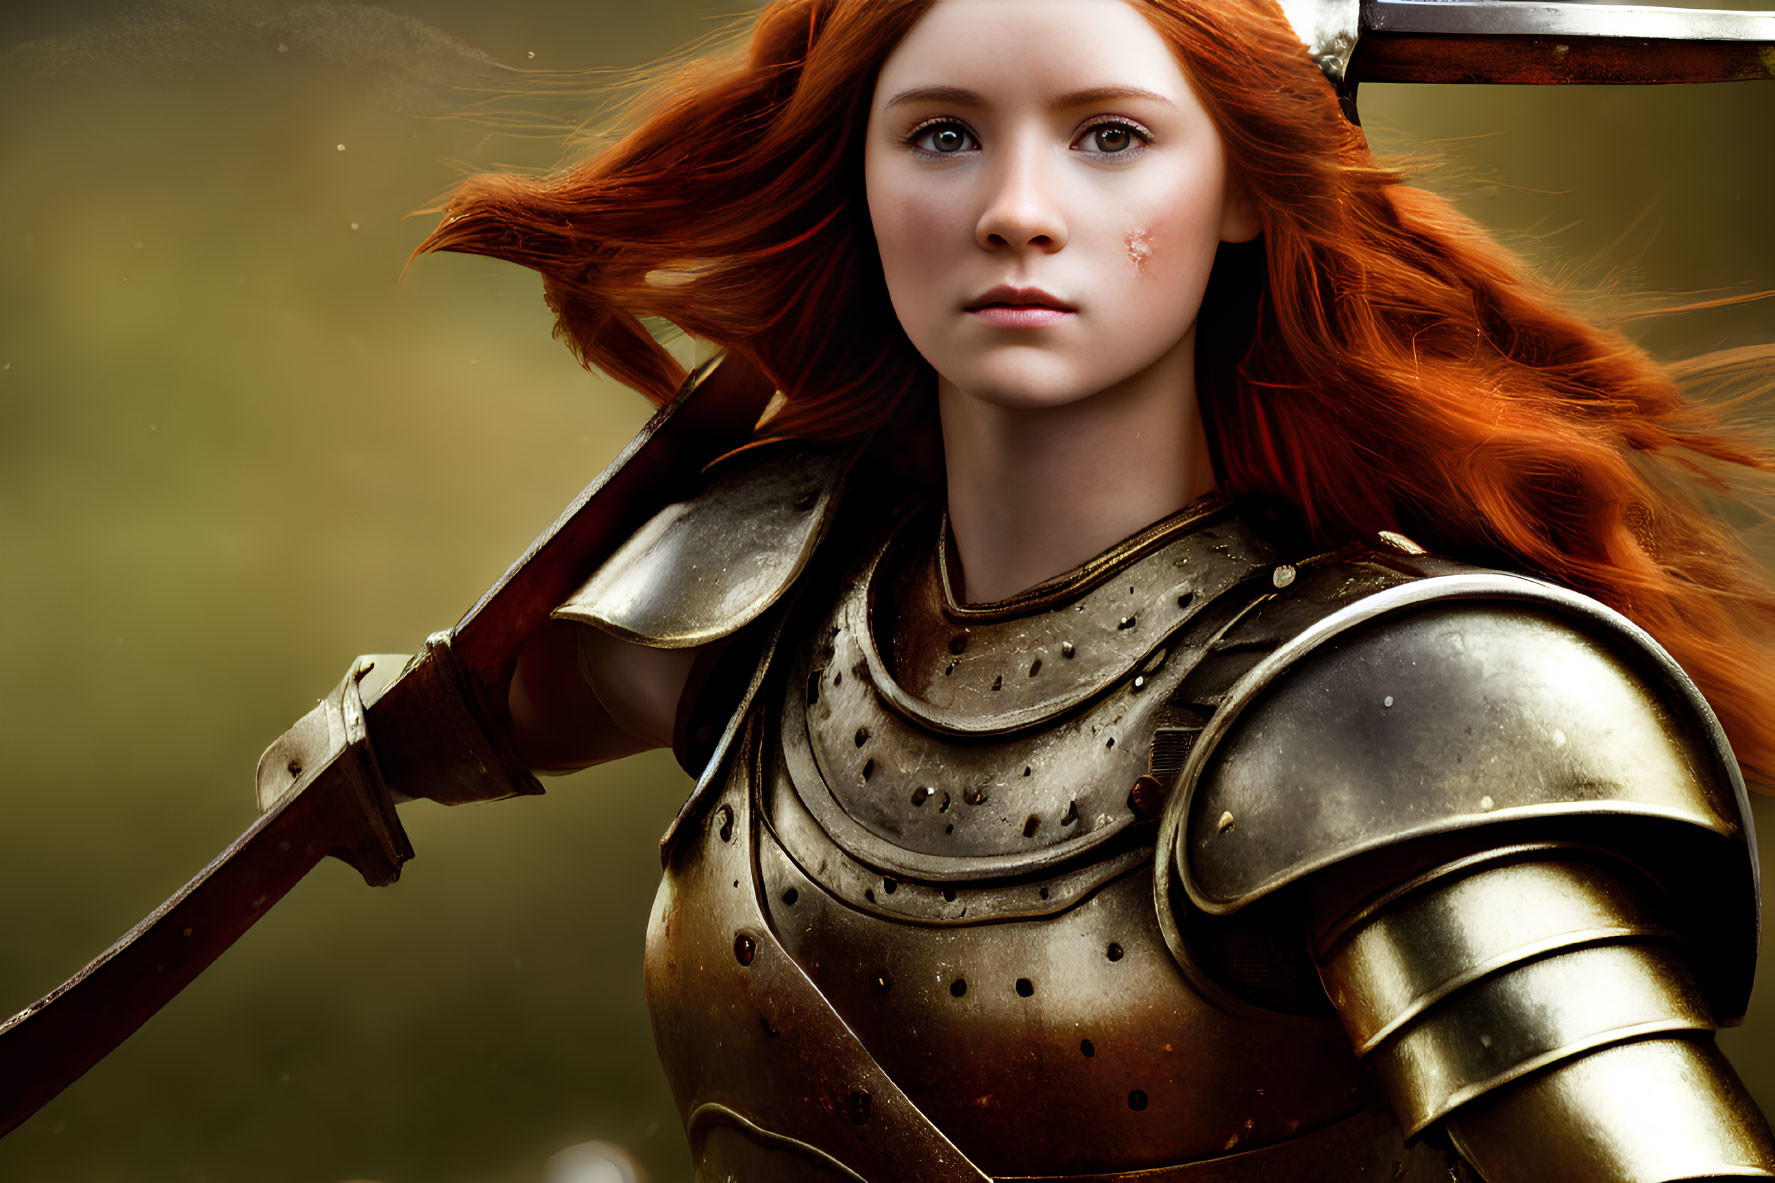 Red-haired woman in medieval armor with sword and scar on cheek